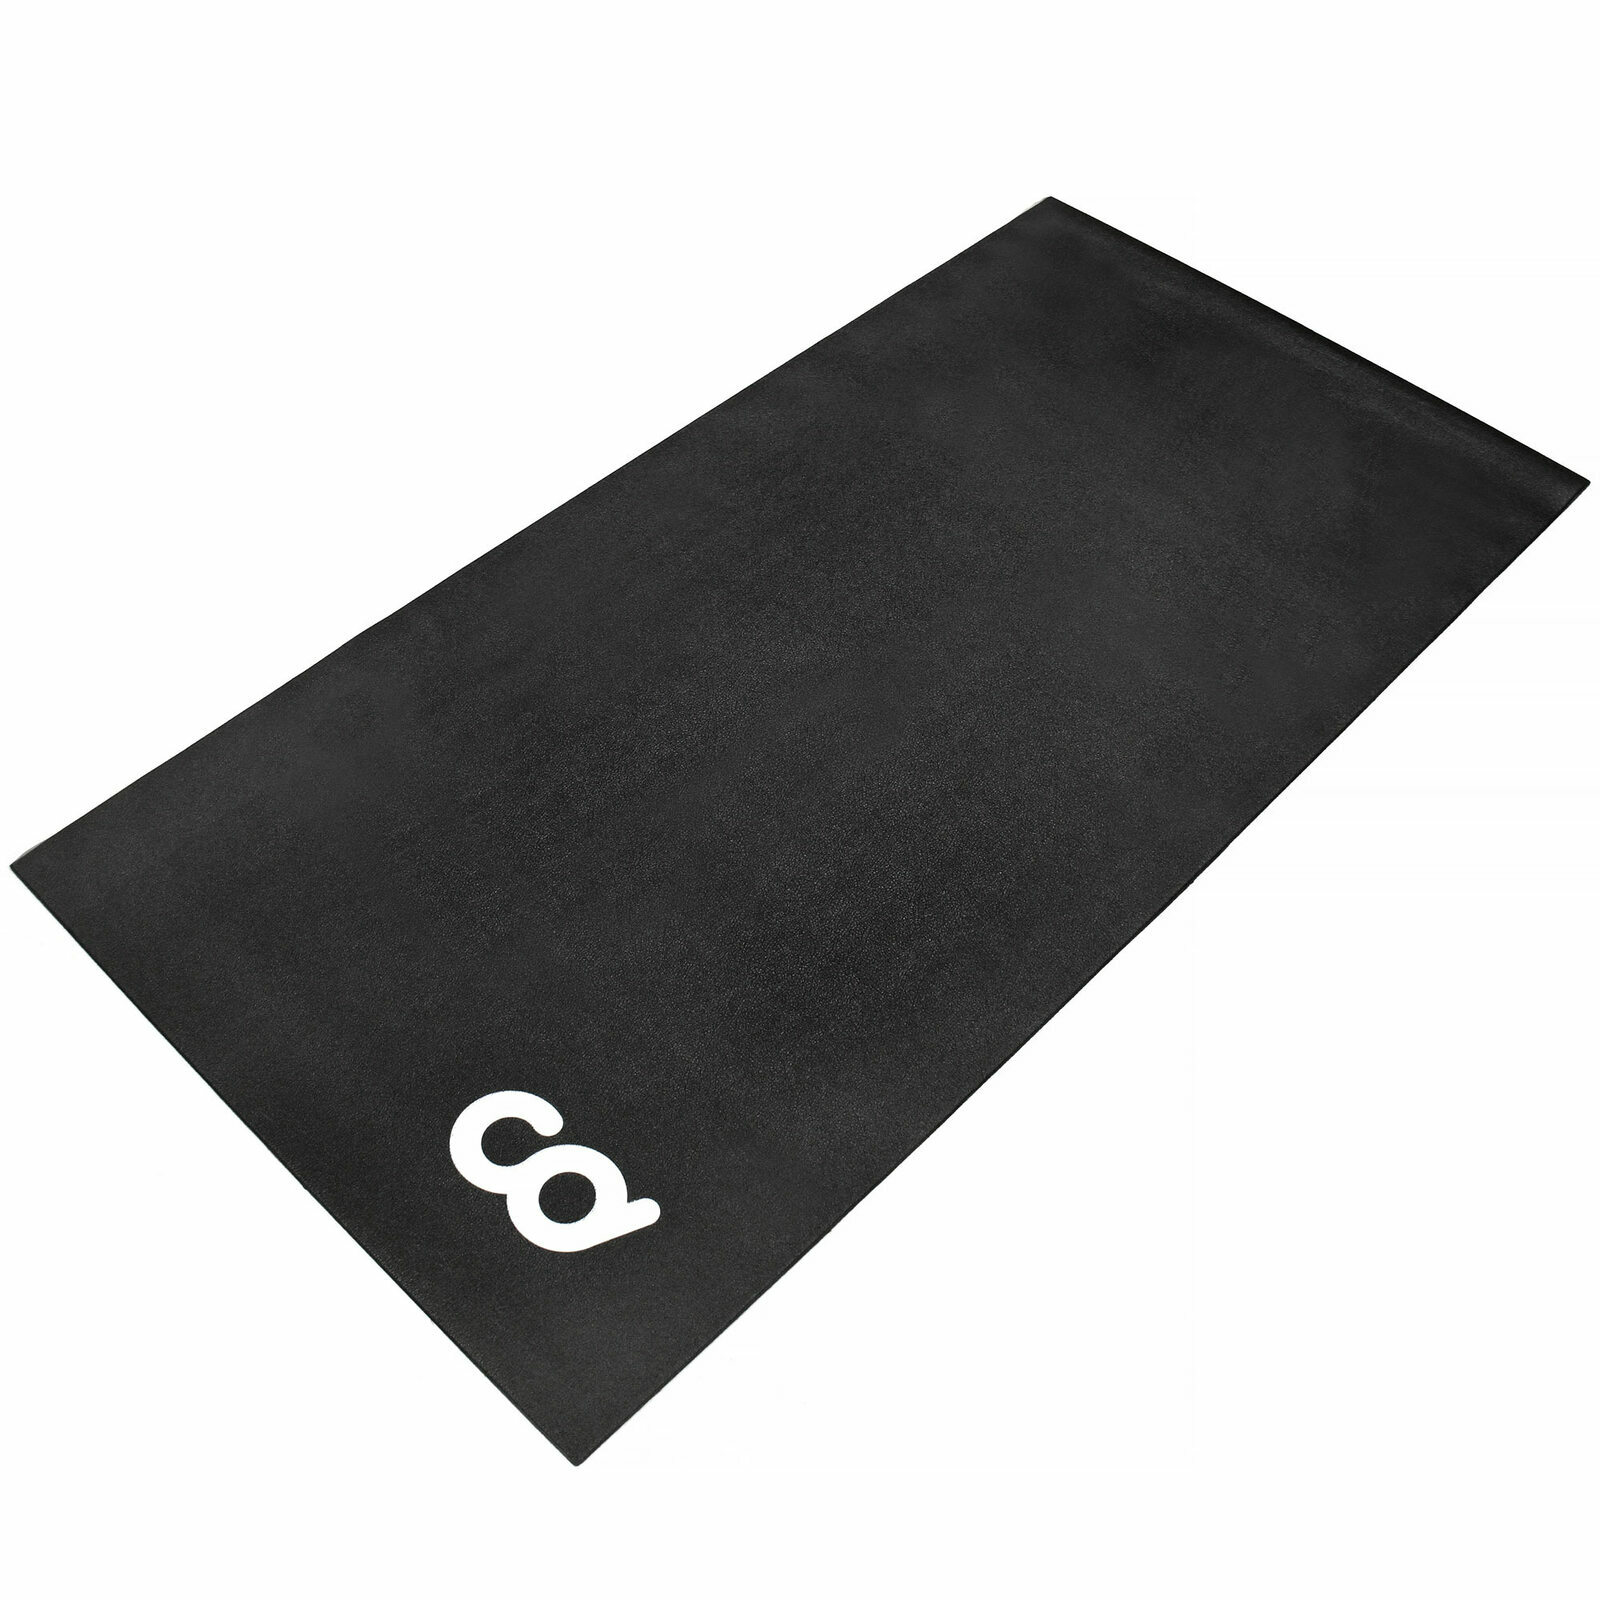 Bicycle Trainer Floor High Density Exercise Spin Bike Mat (30-inch x 60-inch)